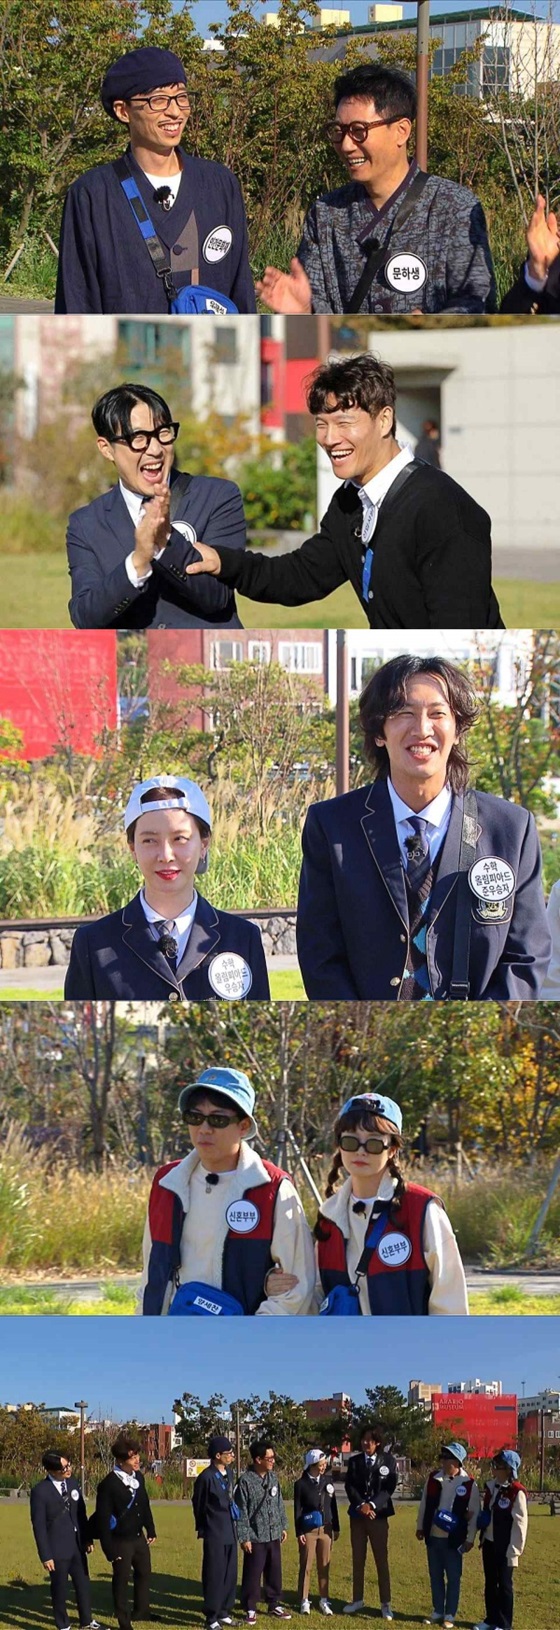 Running Man members laugh at the Jeju Island special feature in the situation drama.According to SBS on June 6, Running Man, a SBS entertainment program broadcasted on the 8th, will feature a situational drama of Running Man members who left Jeju Island package Travel.The concept of A variety of 4 couples who left package Travel with Jeju Island predicted the birth of another legend situation drama.In a recent recording, Human cultural Yoo Jae-Suk, who can not know the identity, and the priest Chemmy of Ji Suk-jin, Super Rookie Kim Jong-kook and Super Rookie Haha, Unknown Alcondalkong newlywed couple Yang Se-chan and Jeon So-min, Mathematics Olympiad winner Song Ji-hyo and Junwoo winner Lee Kwang-soo caught the attention with their character and mate.They enjoyed a great trip to the scenery and sightseeing spots of Jeju Island, touring restaurants, taking pictures of life, but it is the back door that the tension in the pleasant travel was circulating when the super-class reversal hidden in the package travel was revealed.It will be broadcast at 5 p.m. on the 8th.